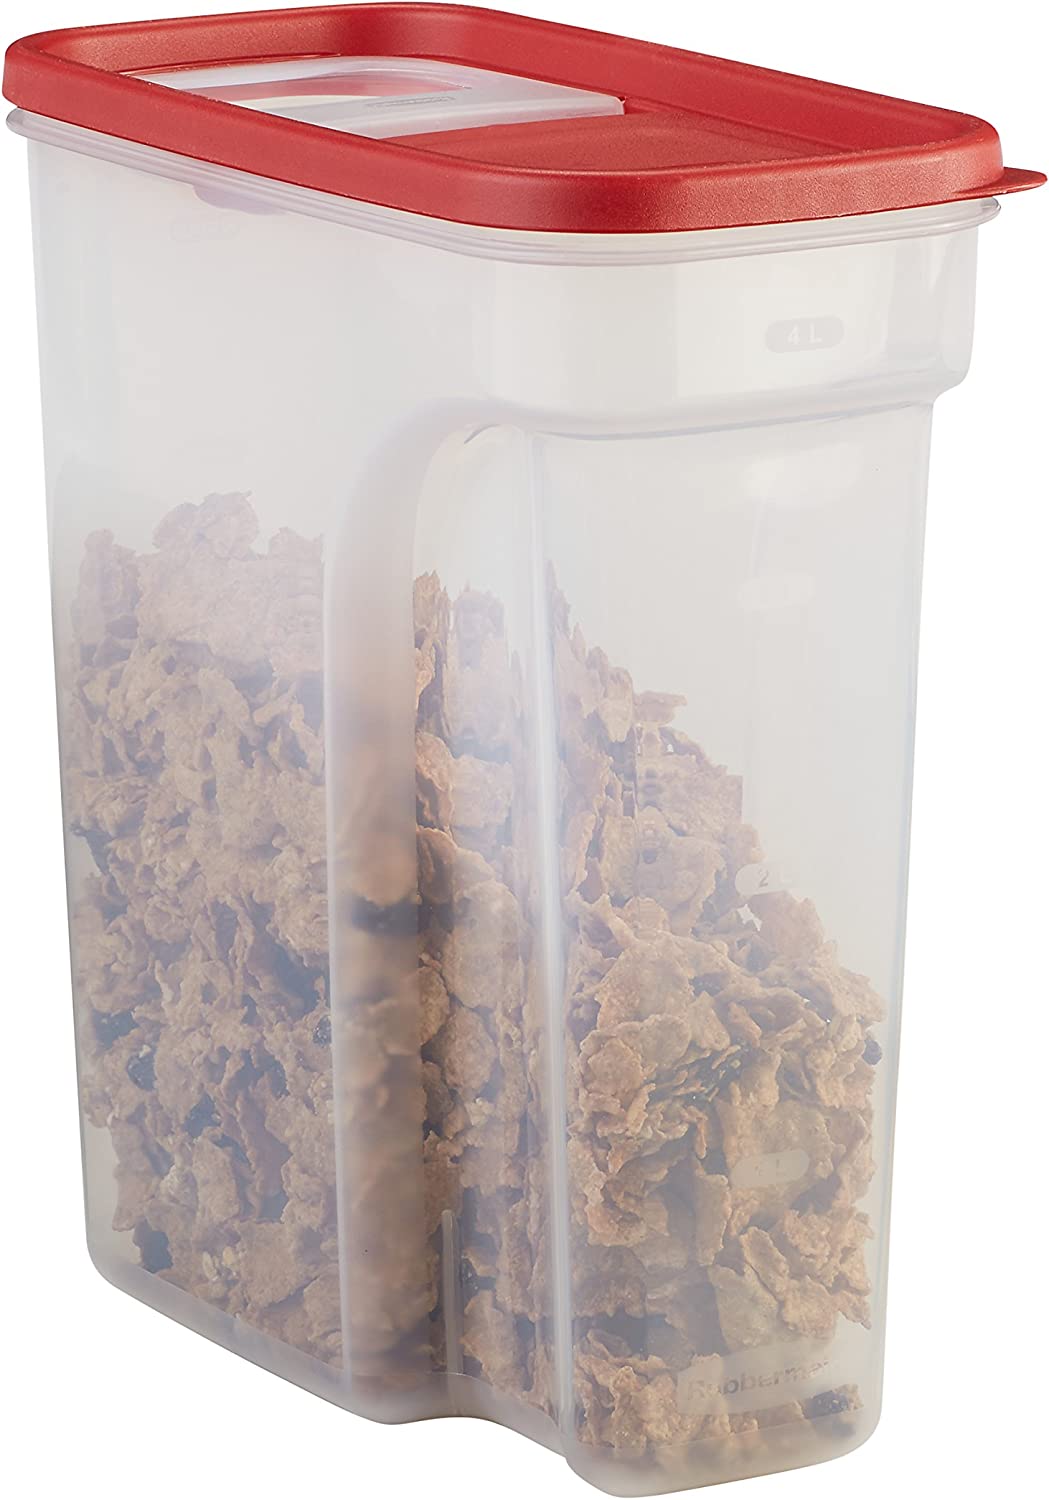 Rubbermaid pet food storage containers for storing pet food